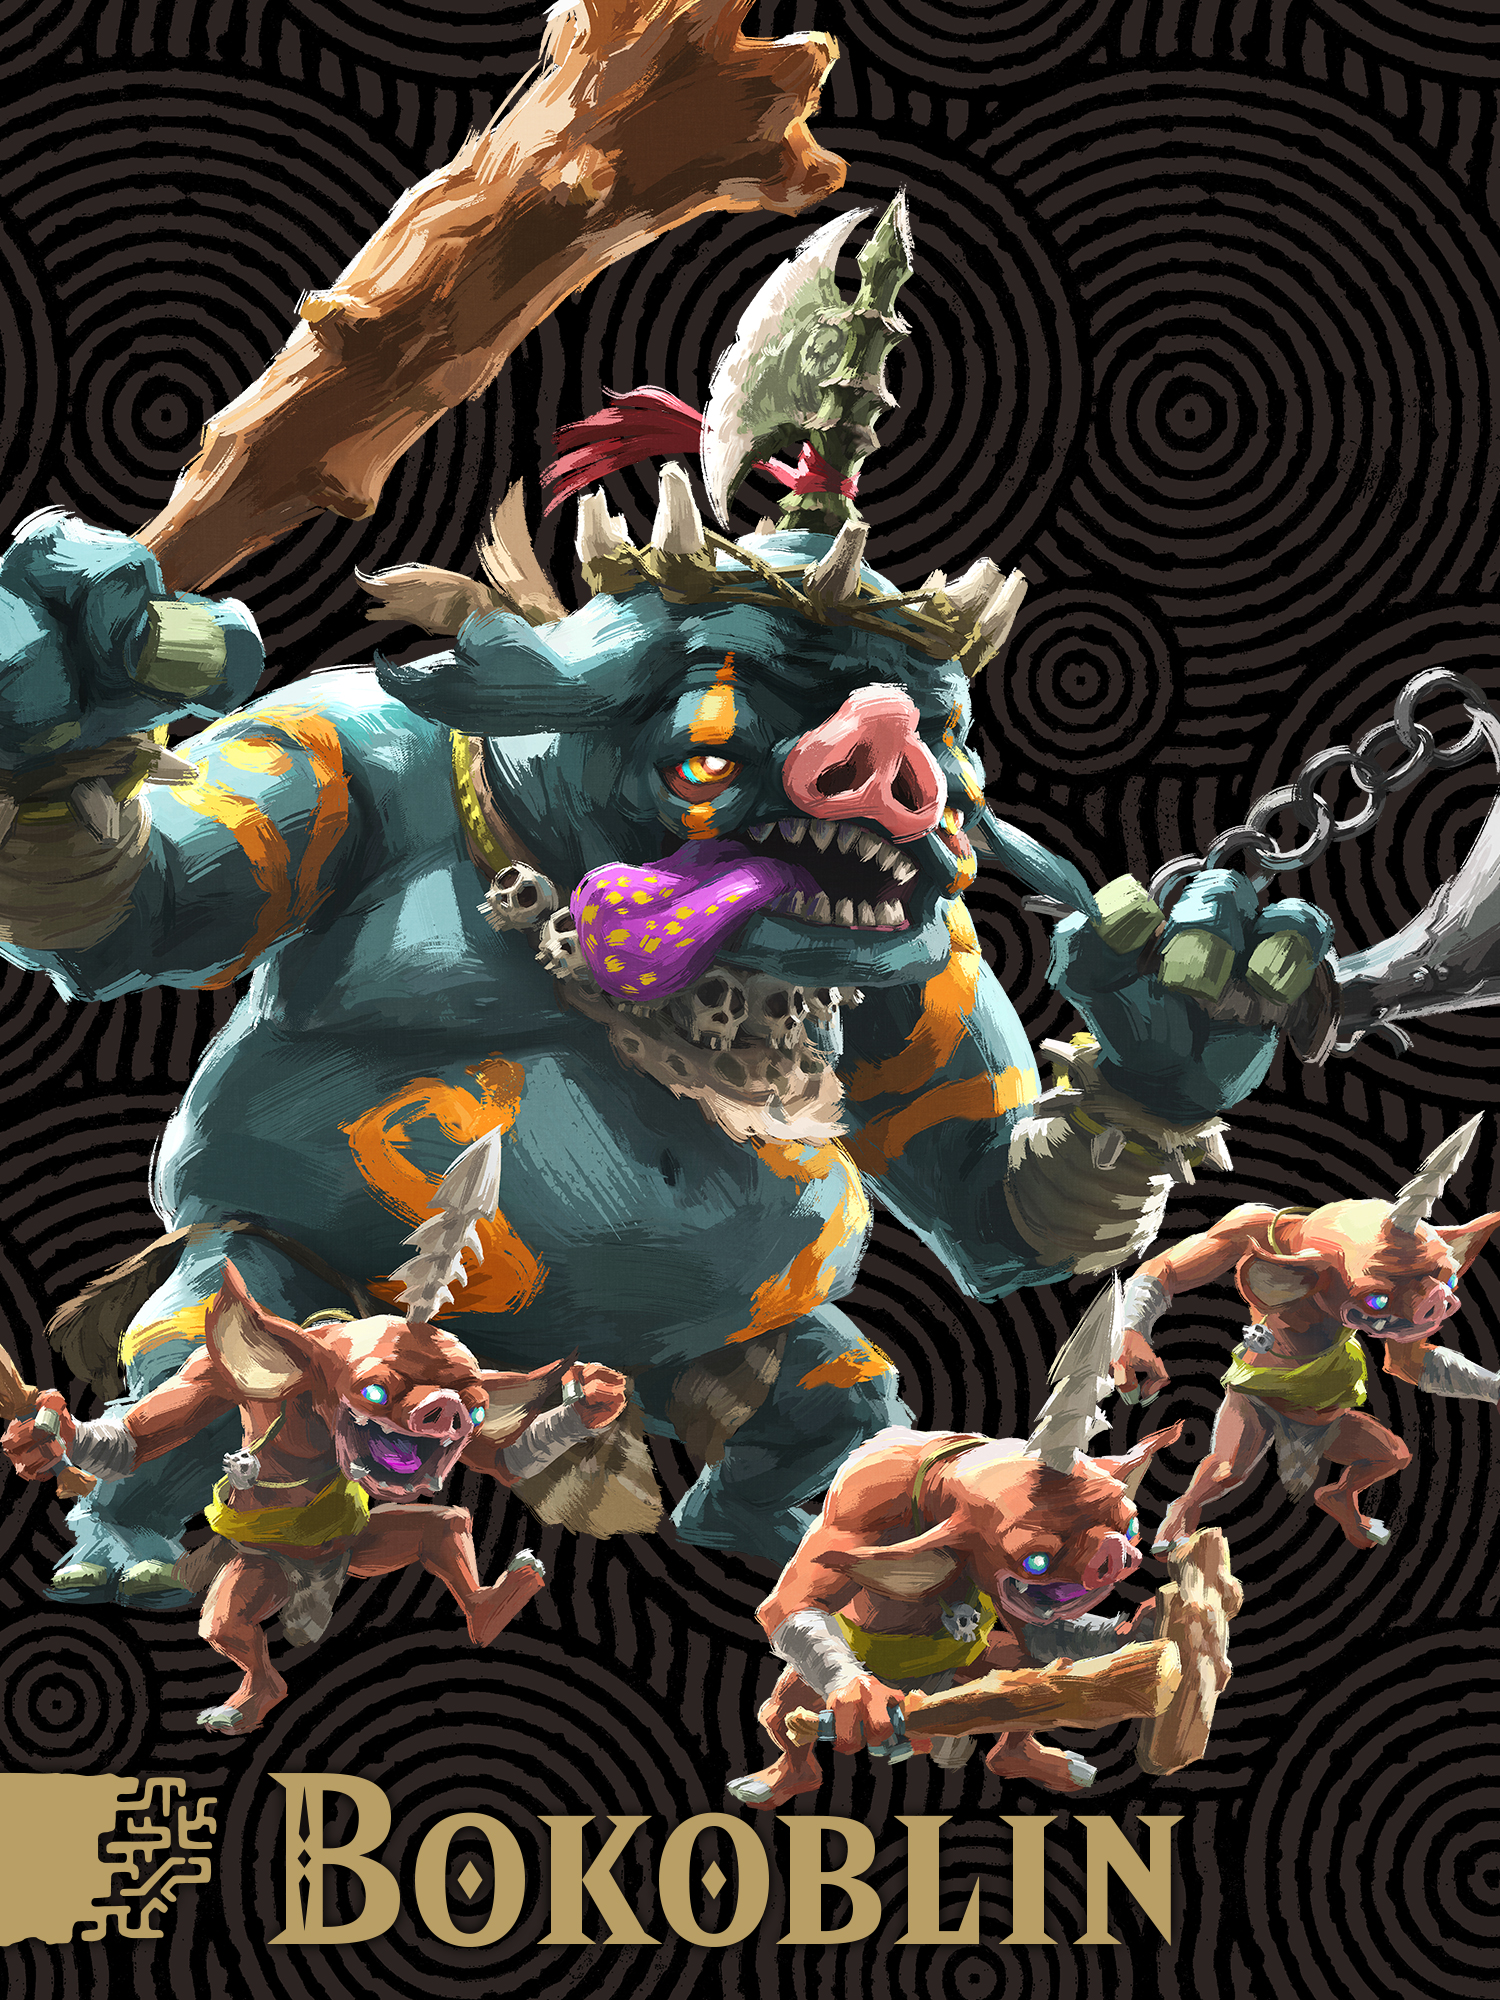 Official art of new blin enemies with spears sticking out of the tops of their heads